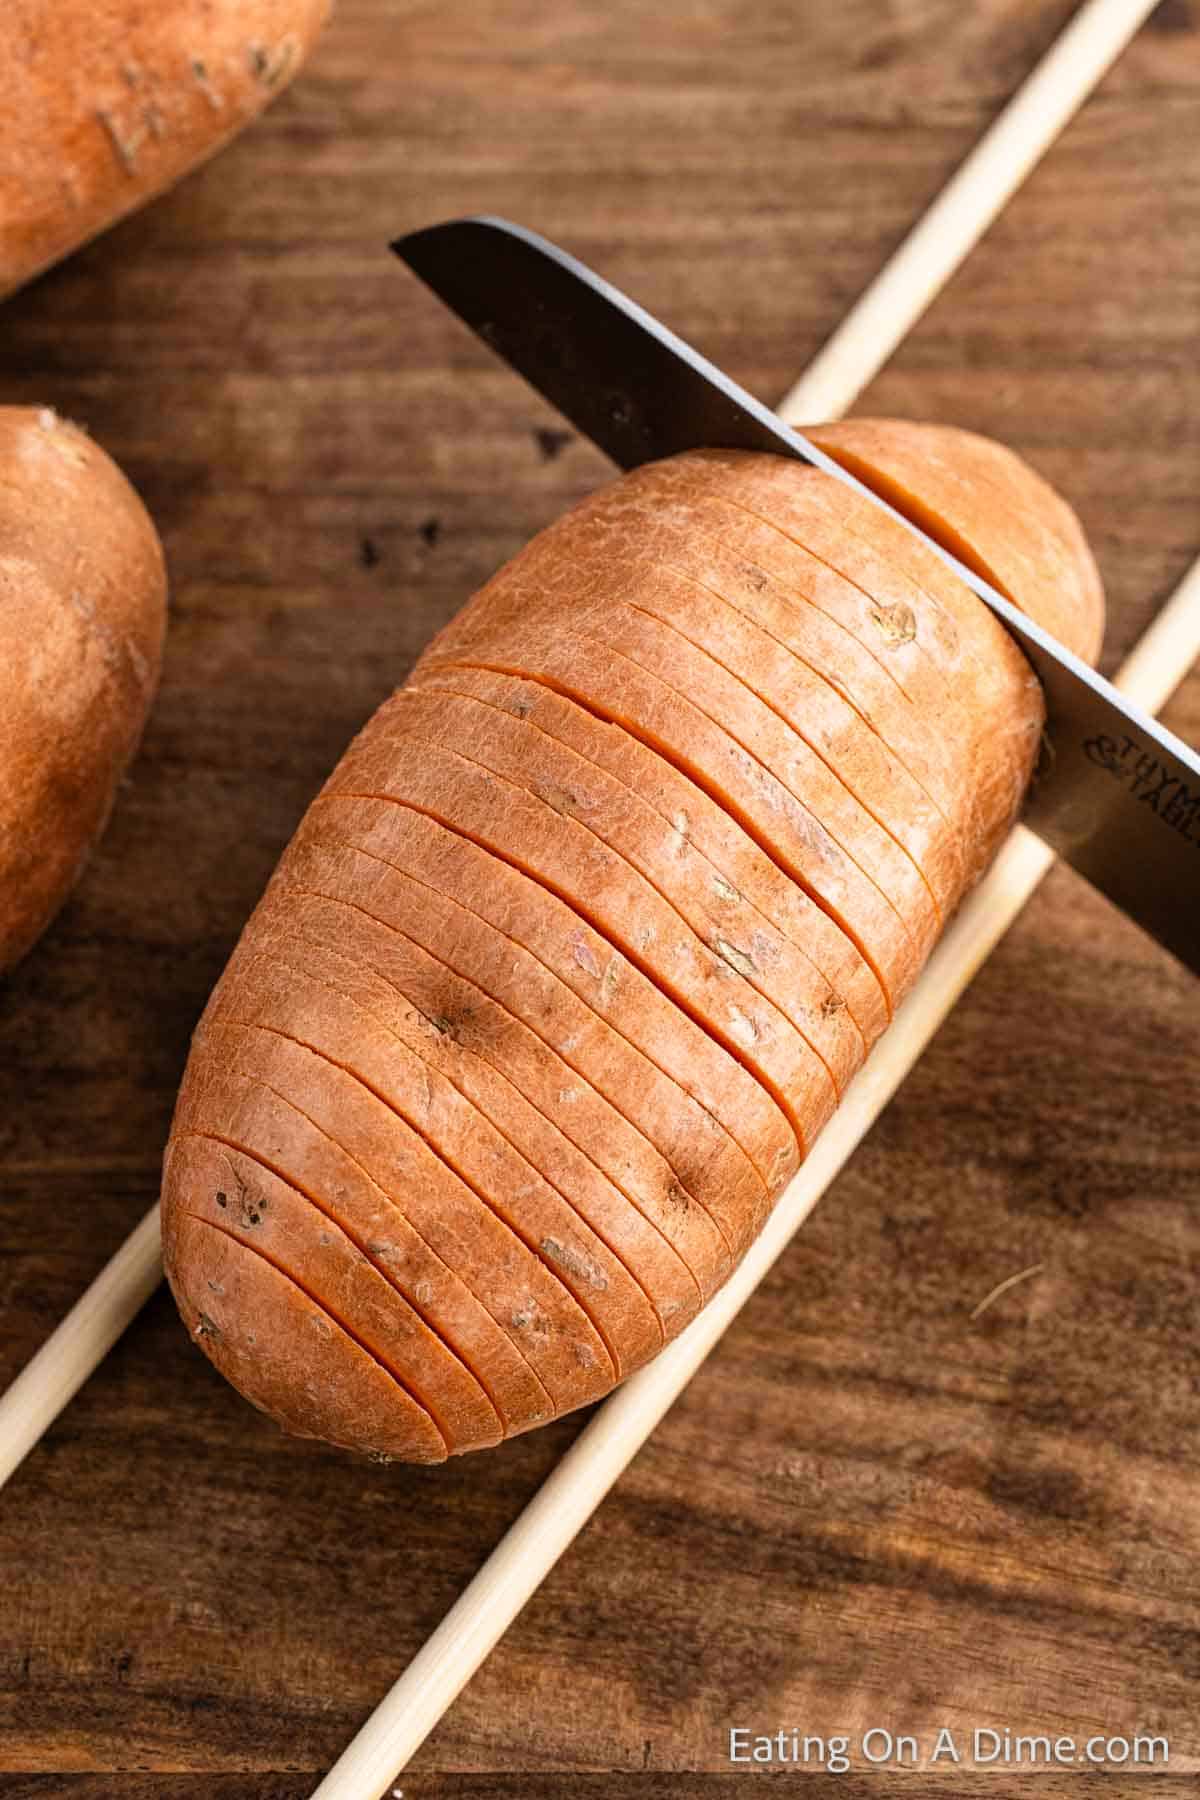 Slicing a whole sweet potato with a knife into small slits with wooden skewers on the side on a cutting board